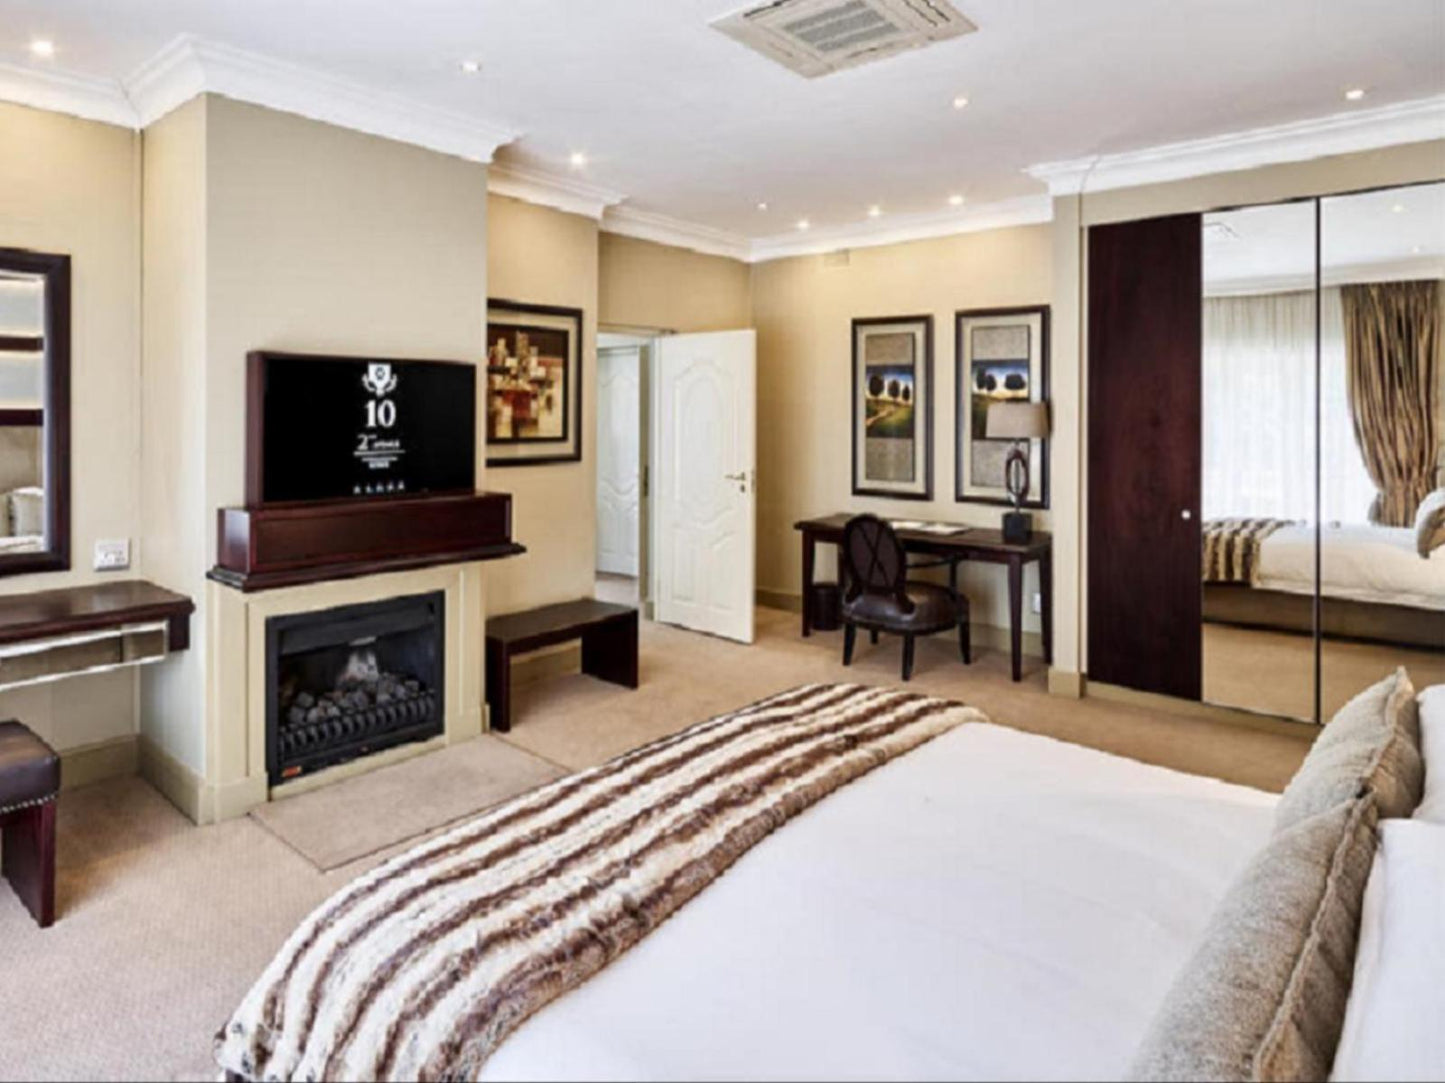 Presidential Suite @ 10 2Nd Avenue Houghton Estate